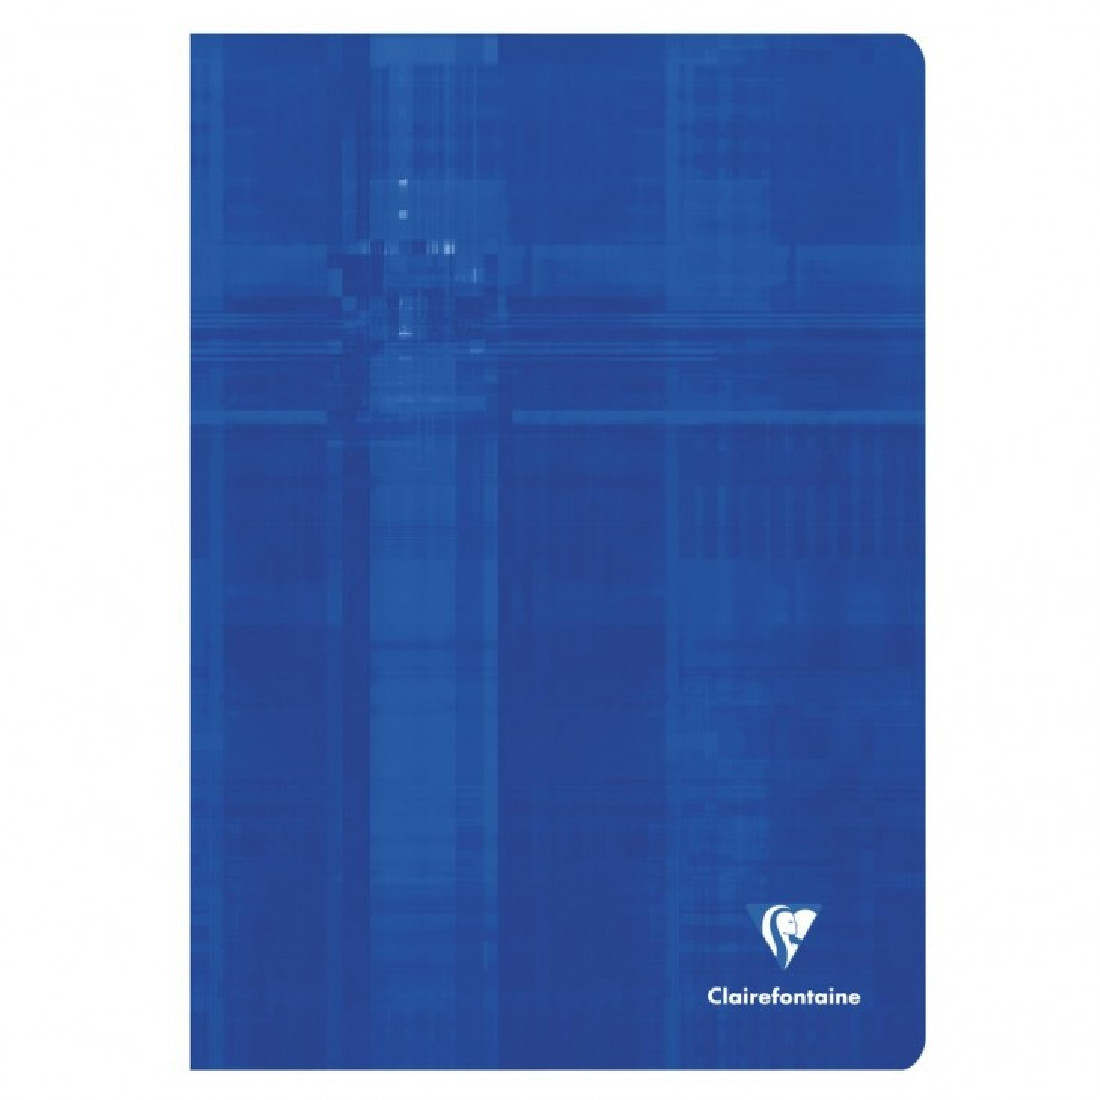 Clairefontaine notebook A4 21X29,7 lined 120 pages, 90g, 3155C Blue